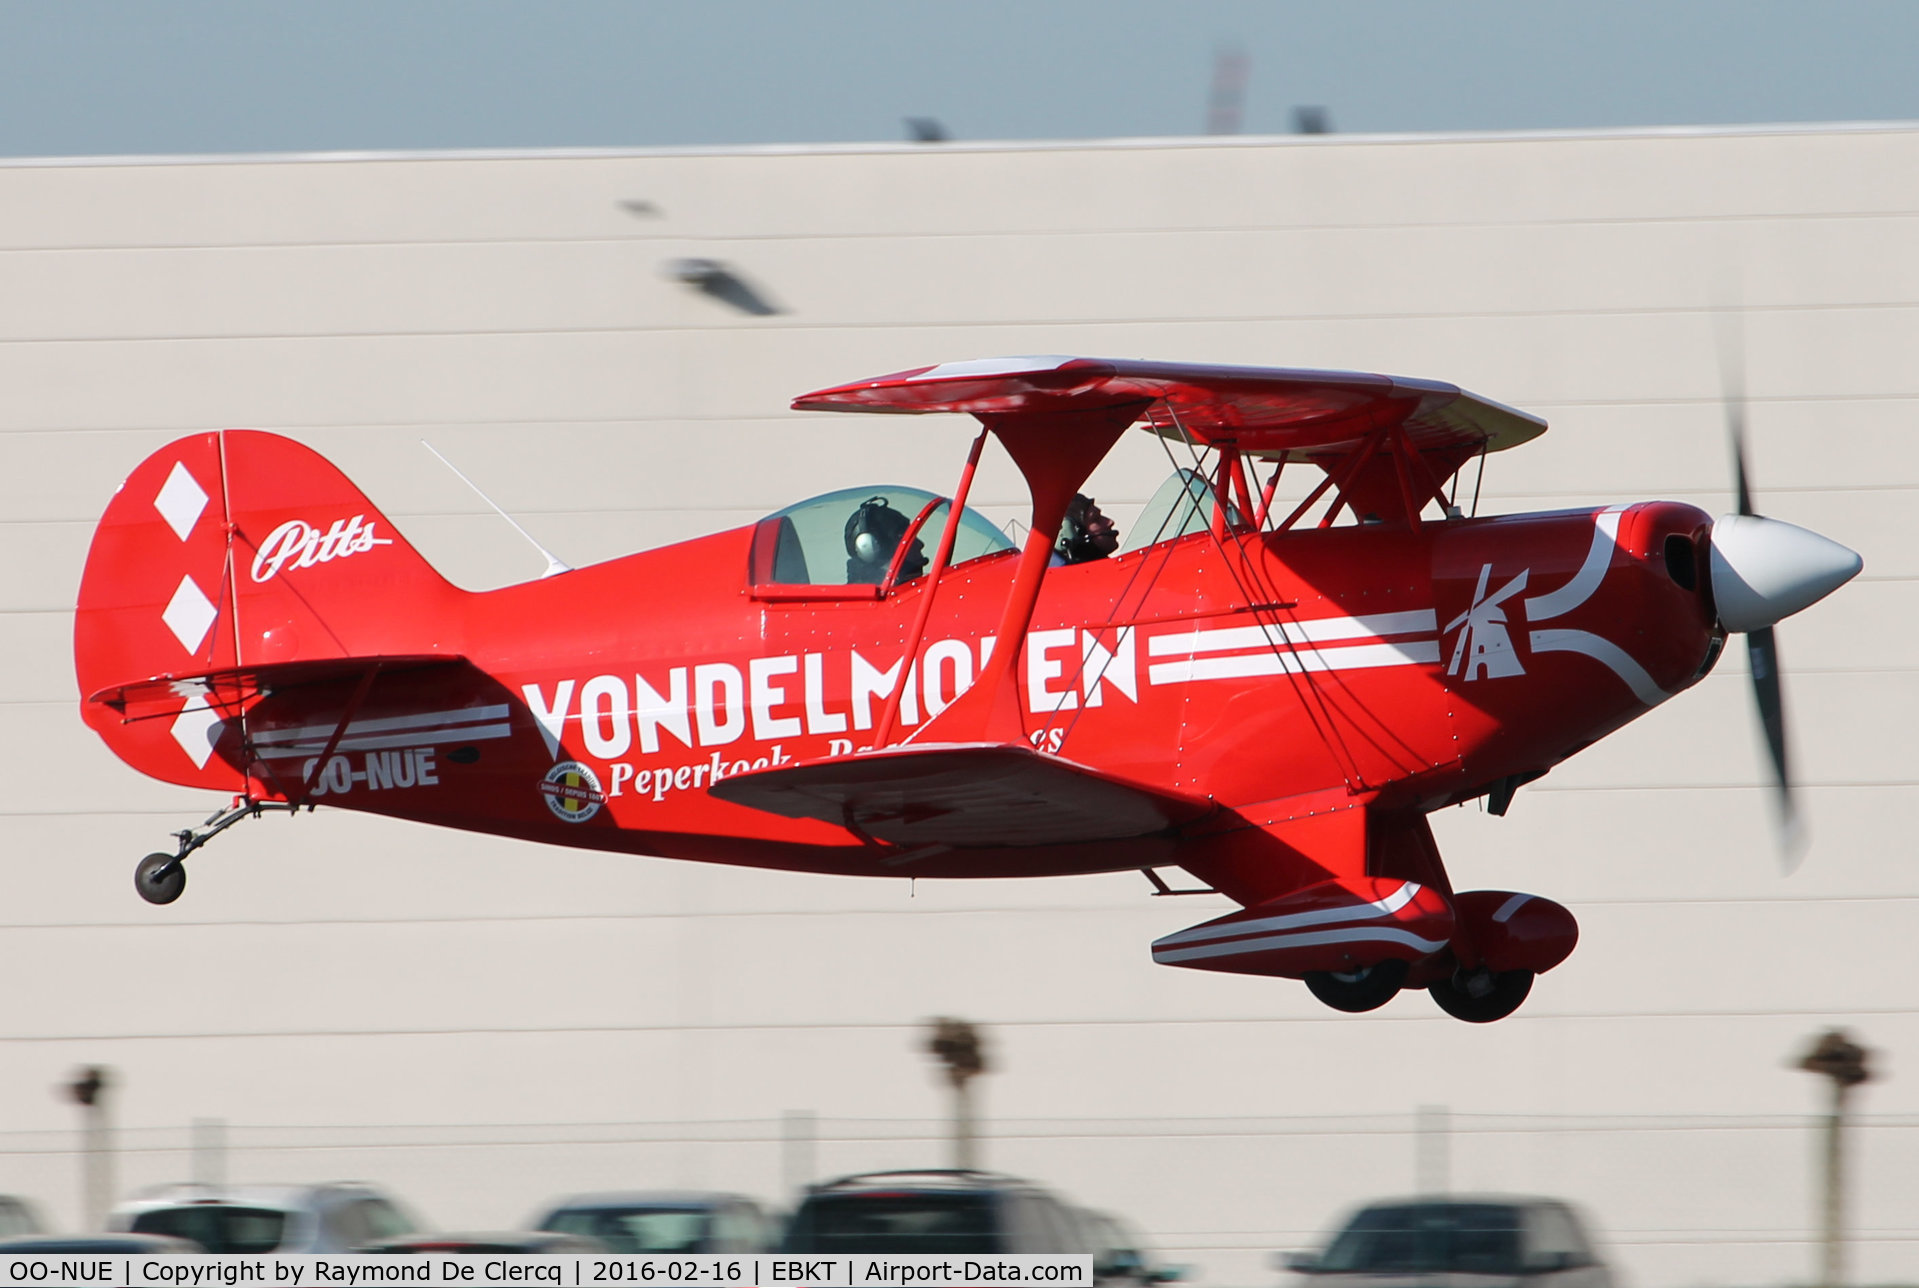 OO-NUE, 1974 Pitts S-2A Special C/N 2078, Restored after accident at Zoersel in 2011. Landing at Wevelgem in a bright new color scheme.